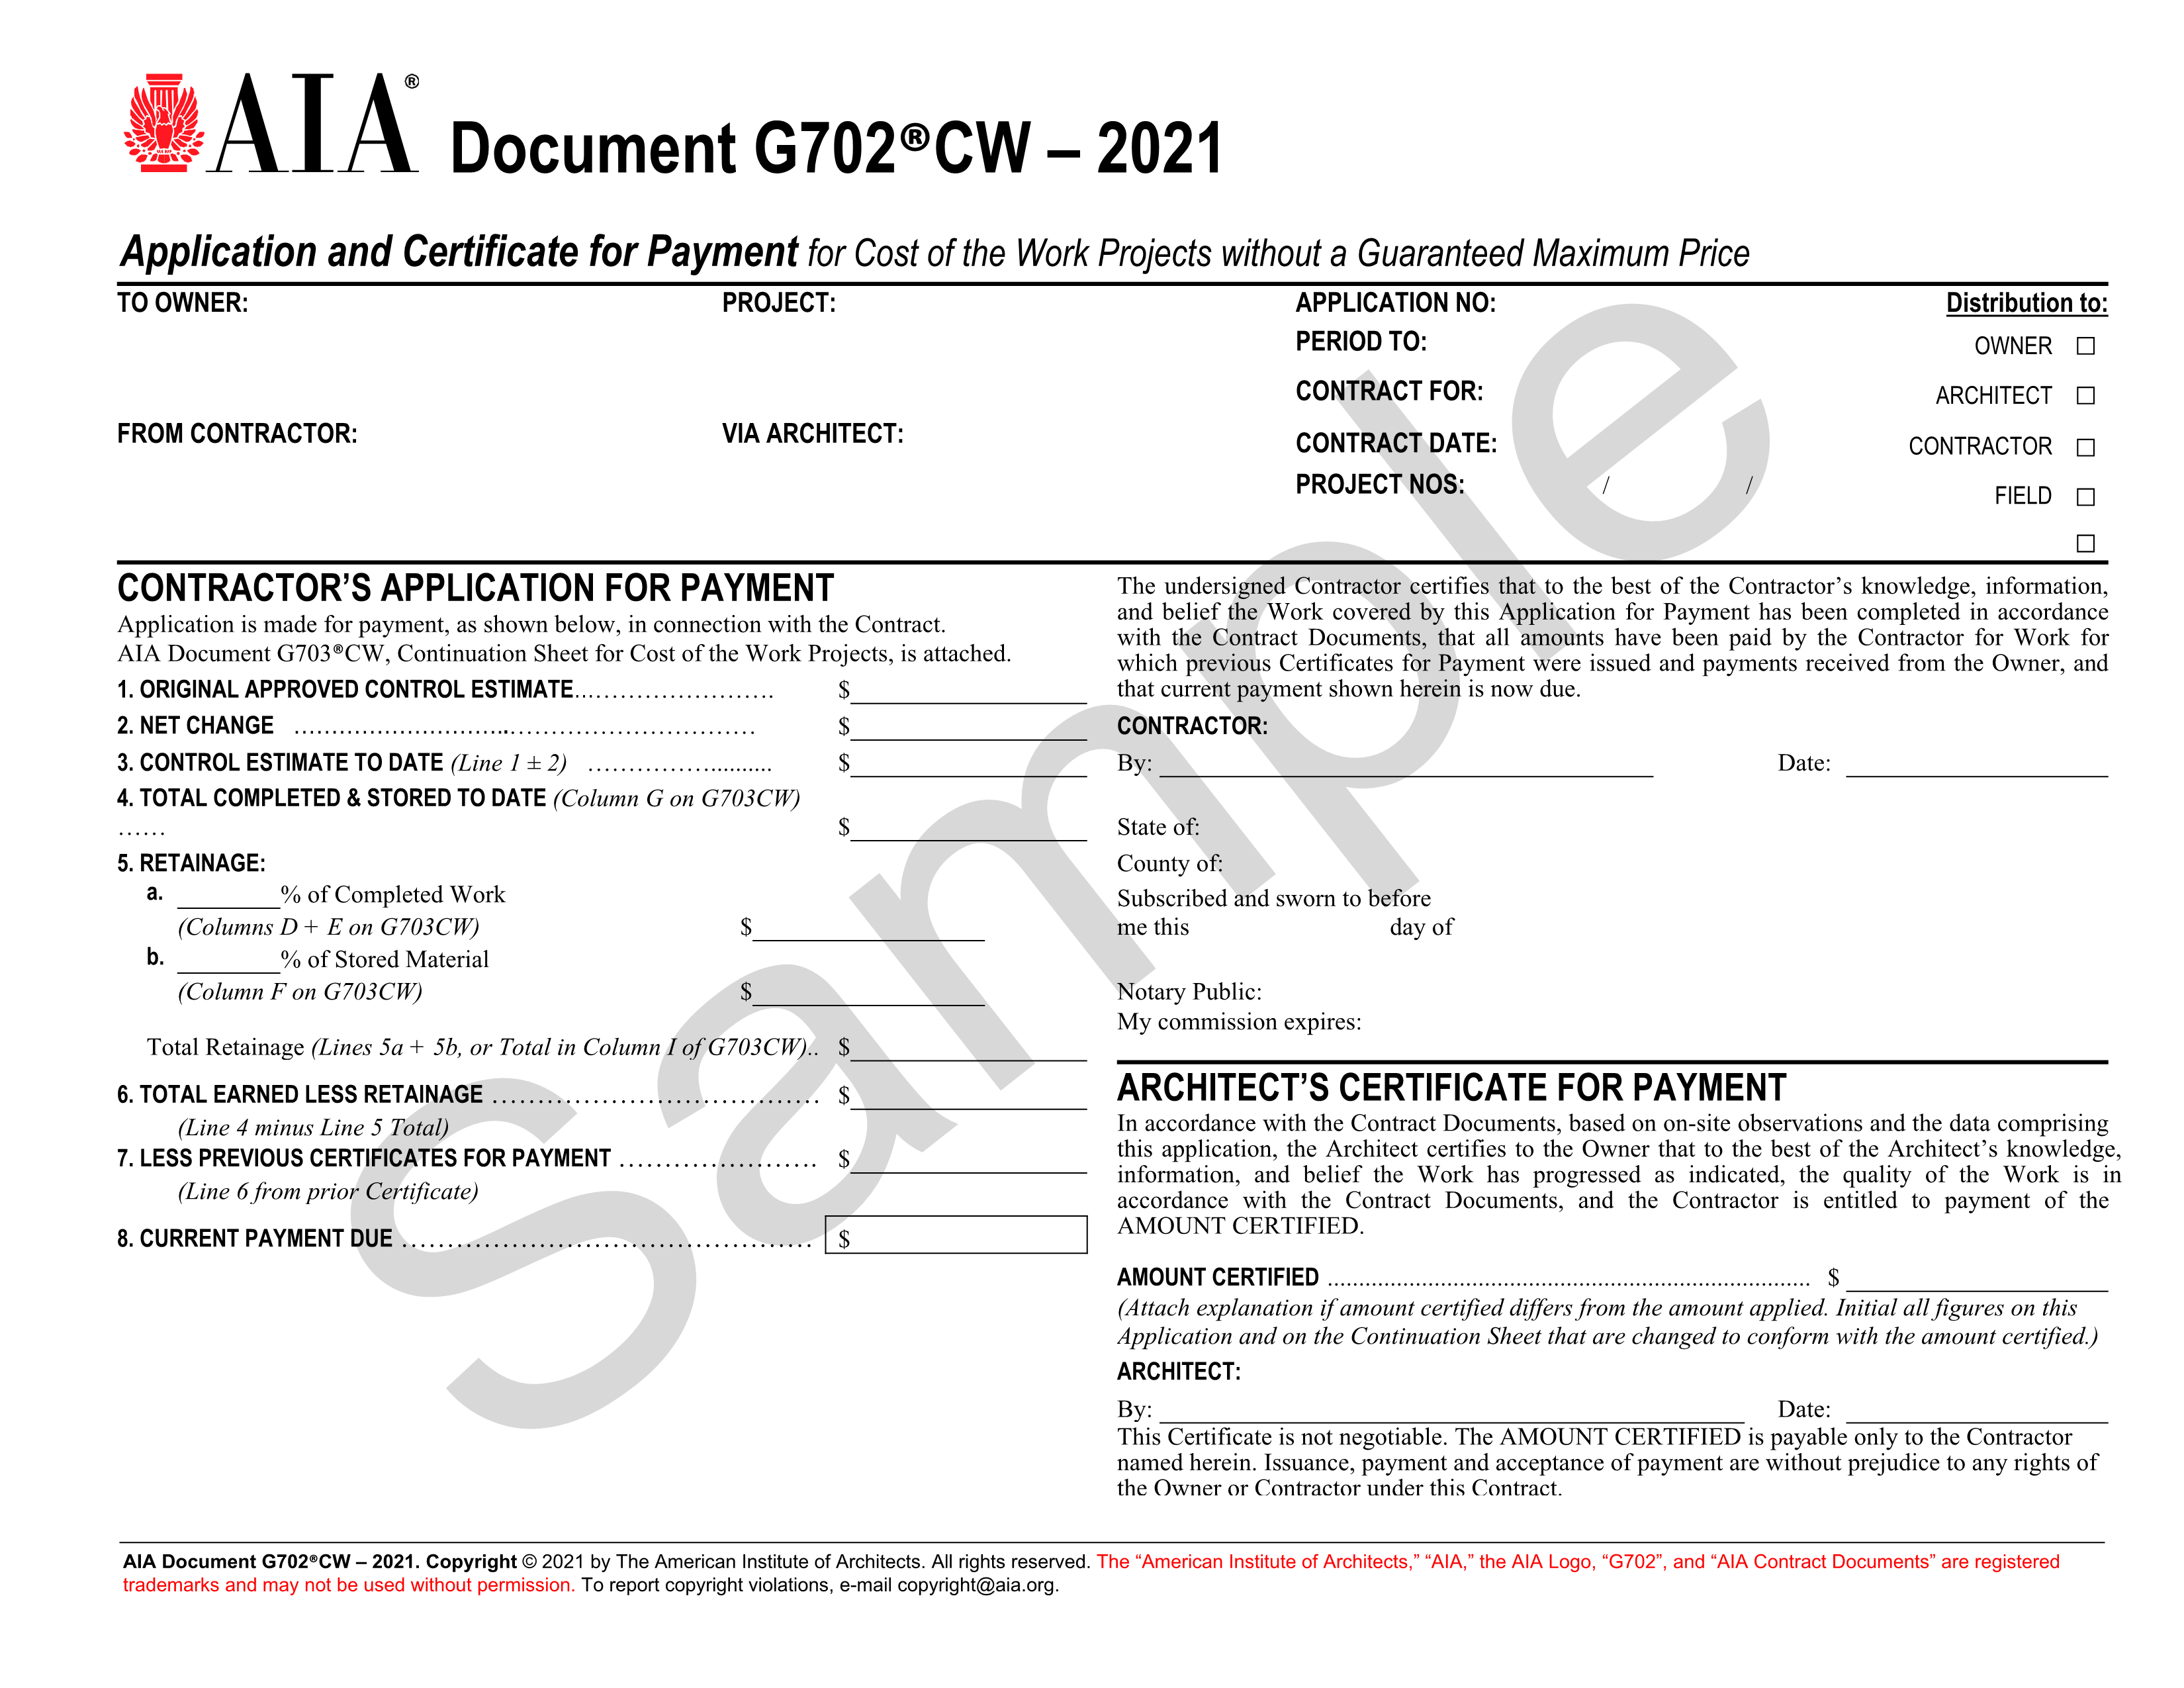 certificate of application 2021